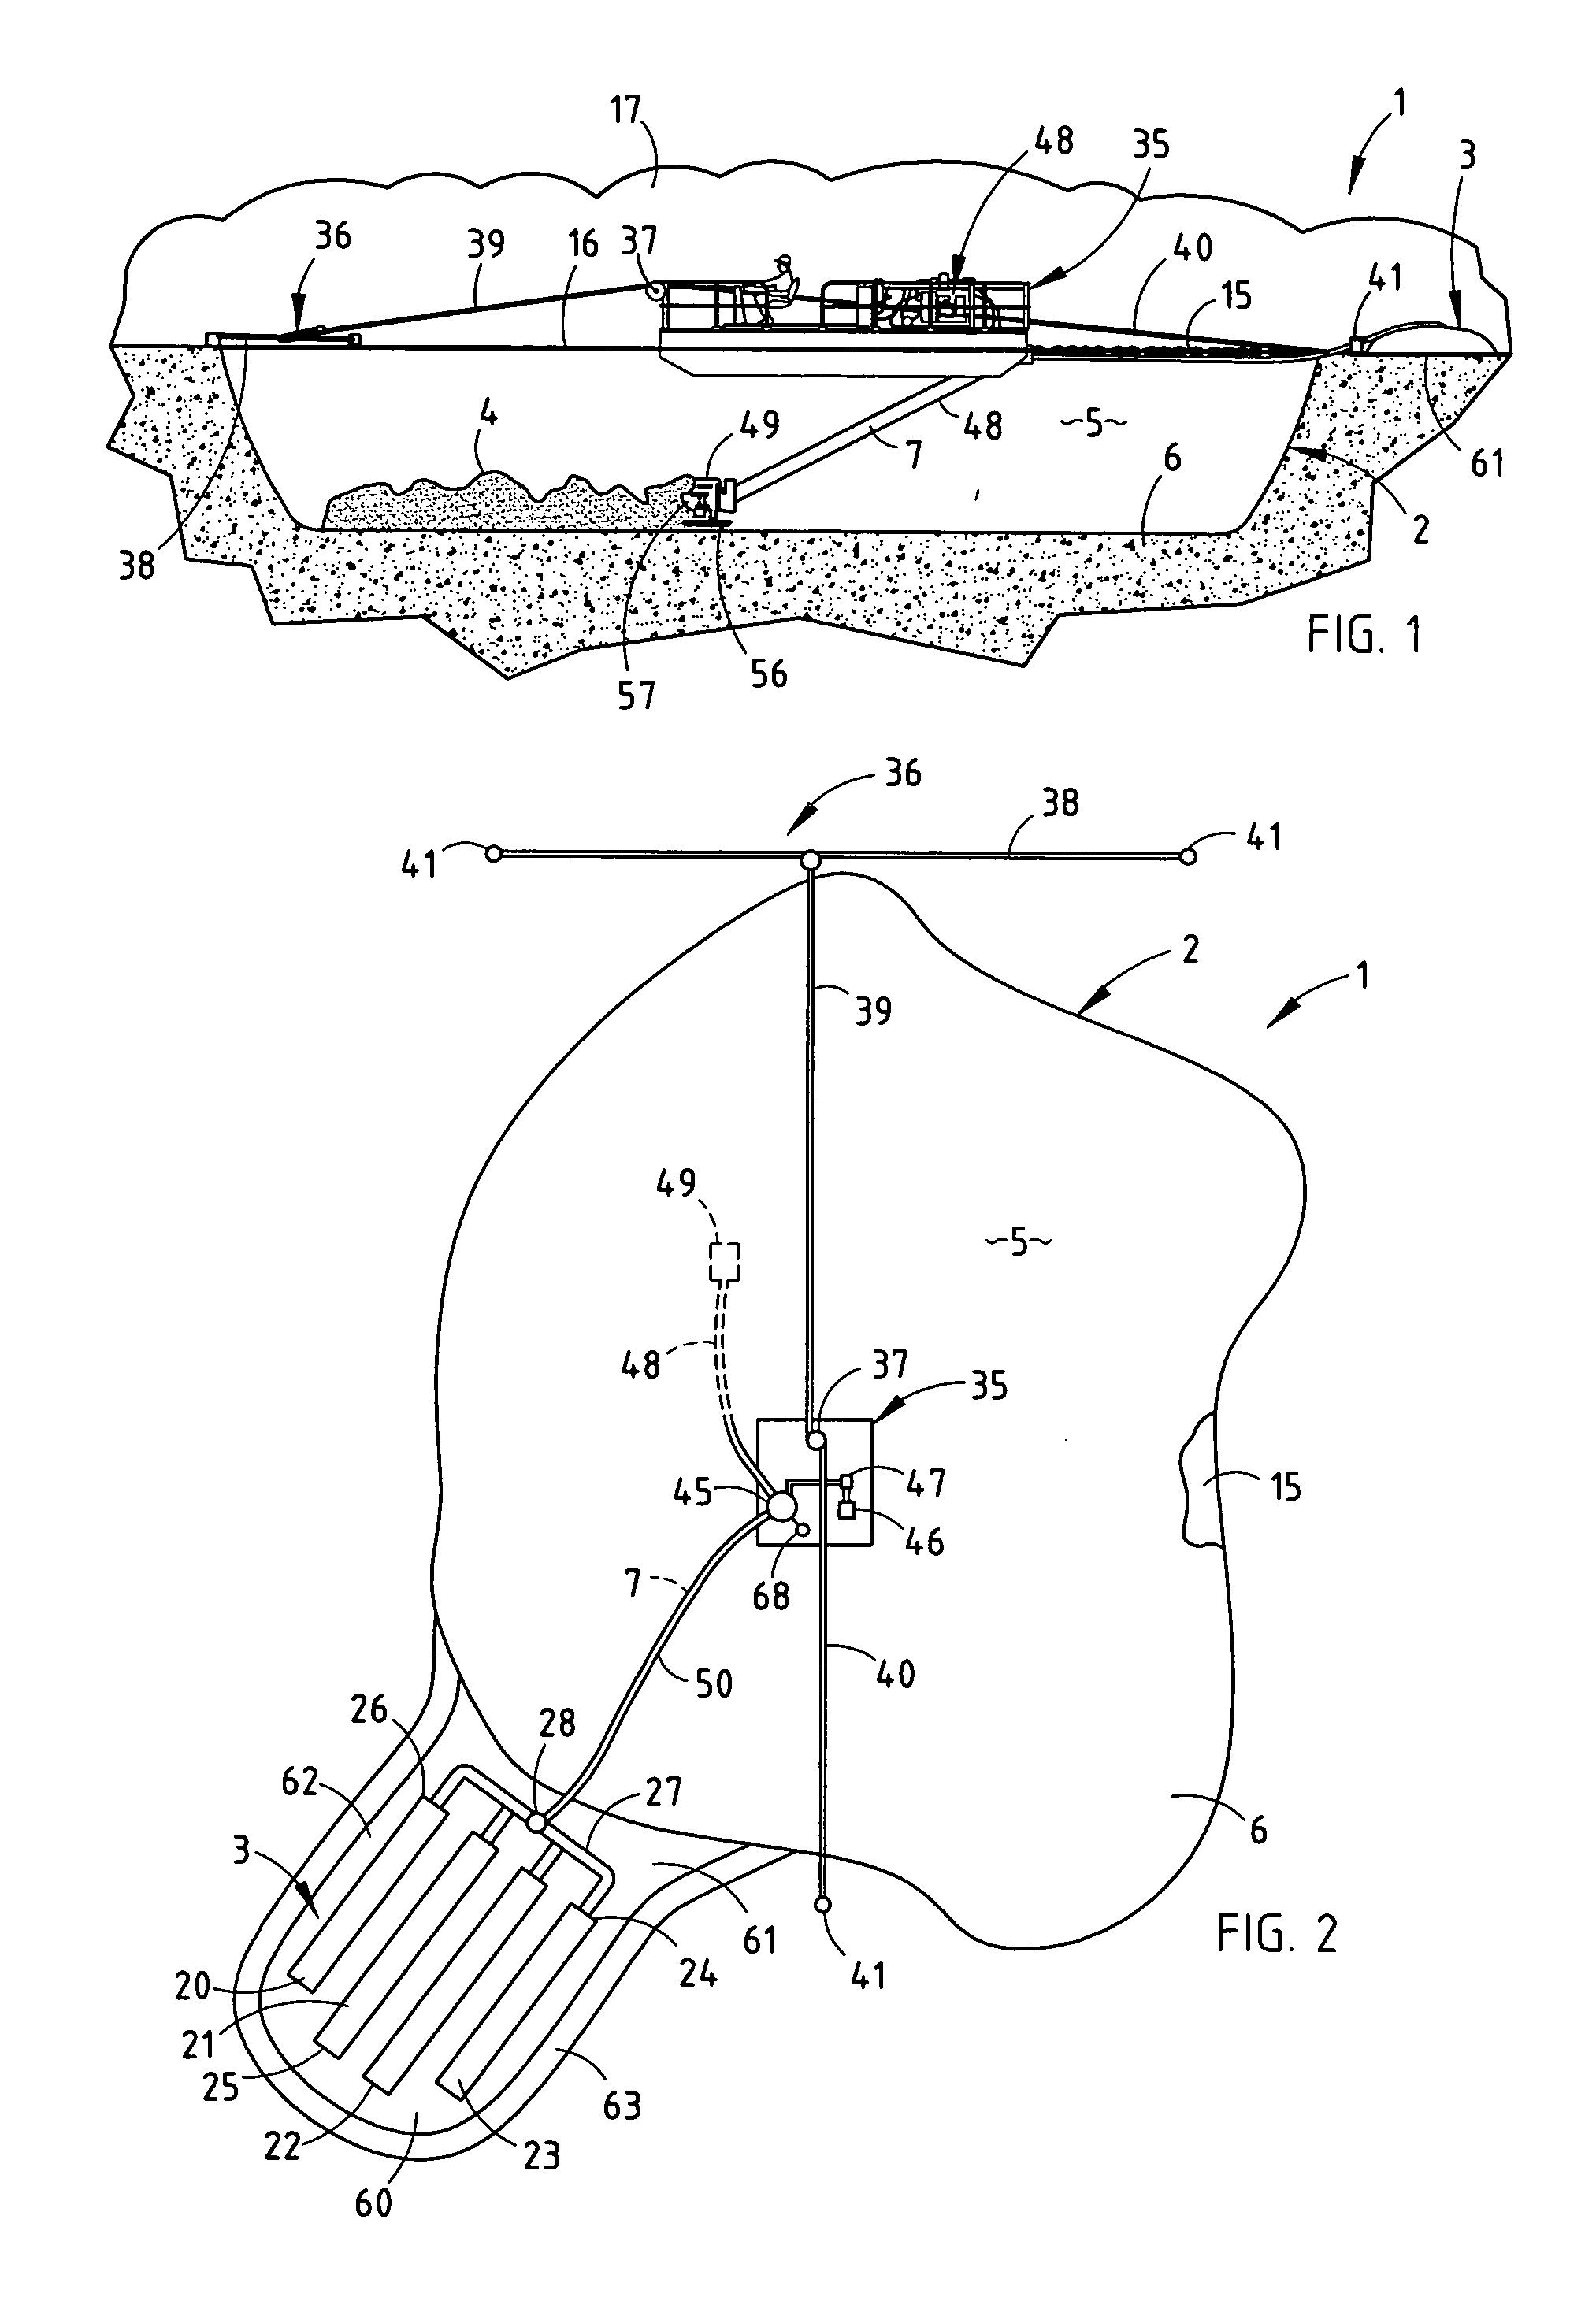 Method and apparatus for remediating wastewater holding areas and the like